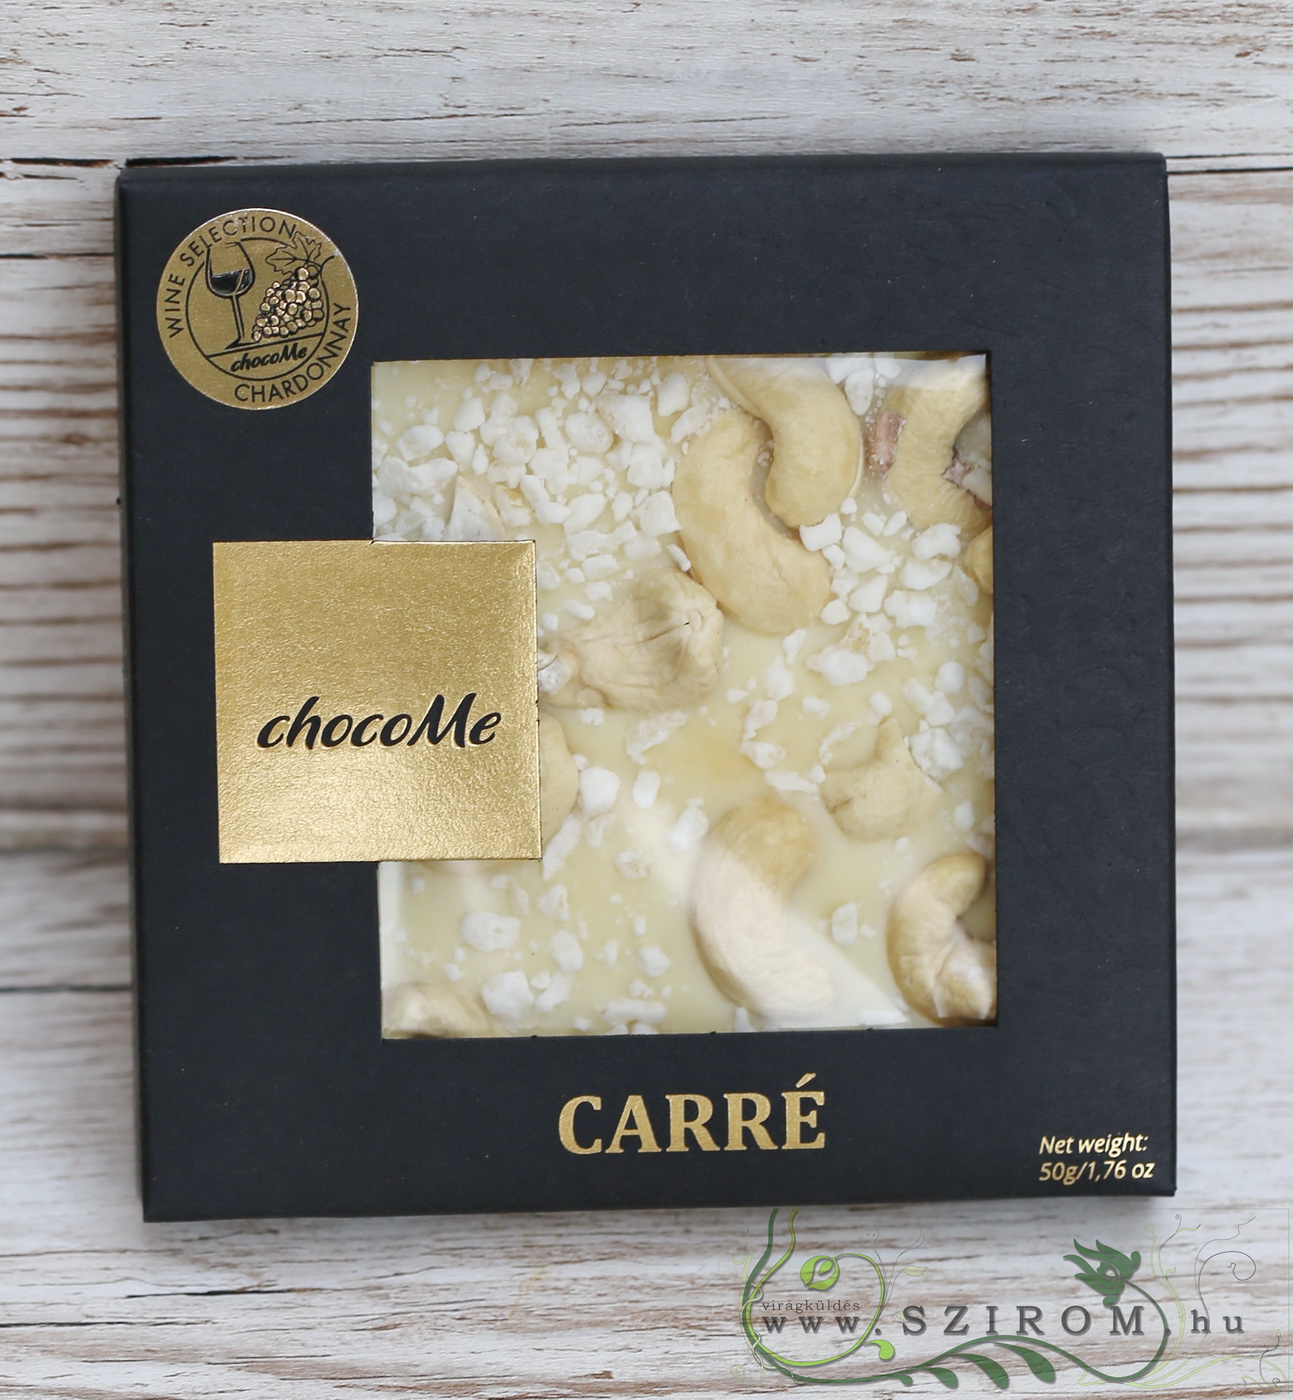 flower delivery Budapest - ChocoMe white chocolate Chardonnay (candied lemon peel, Bourbon vanilla, cashew nuts) 50g